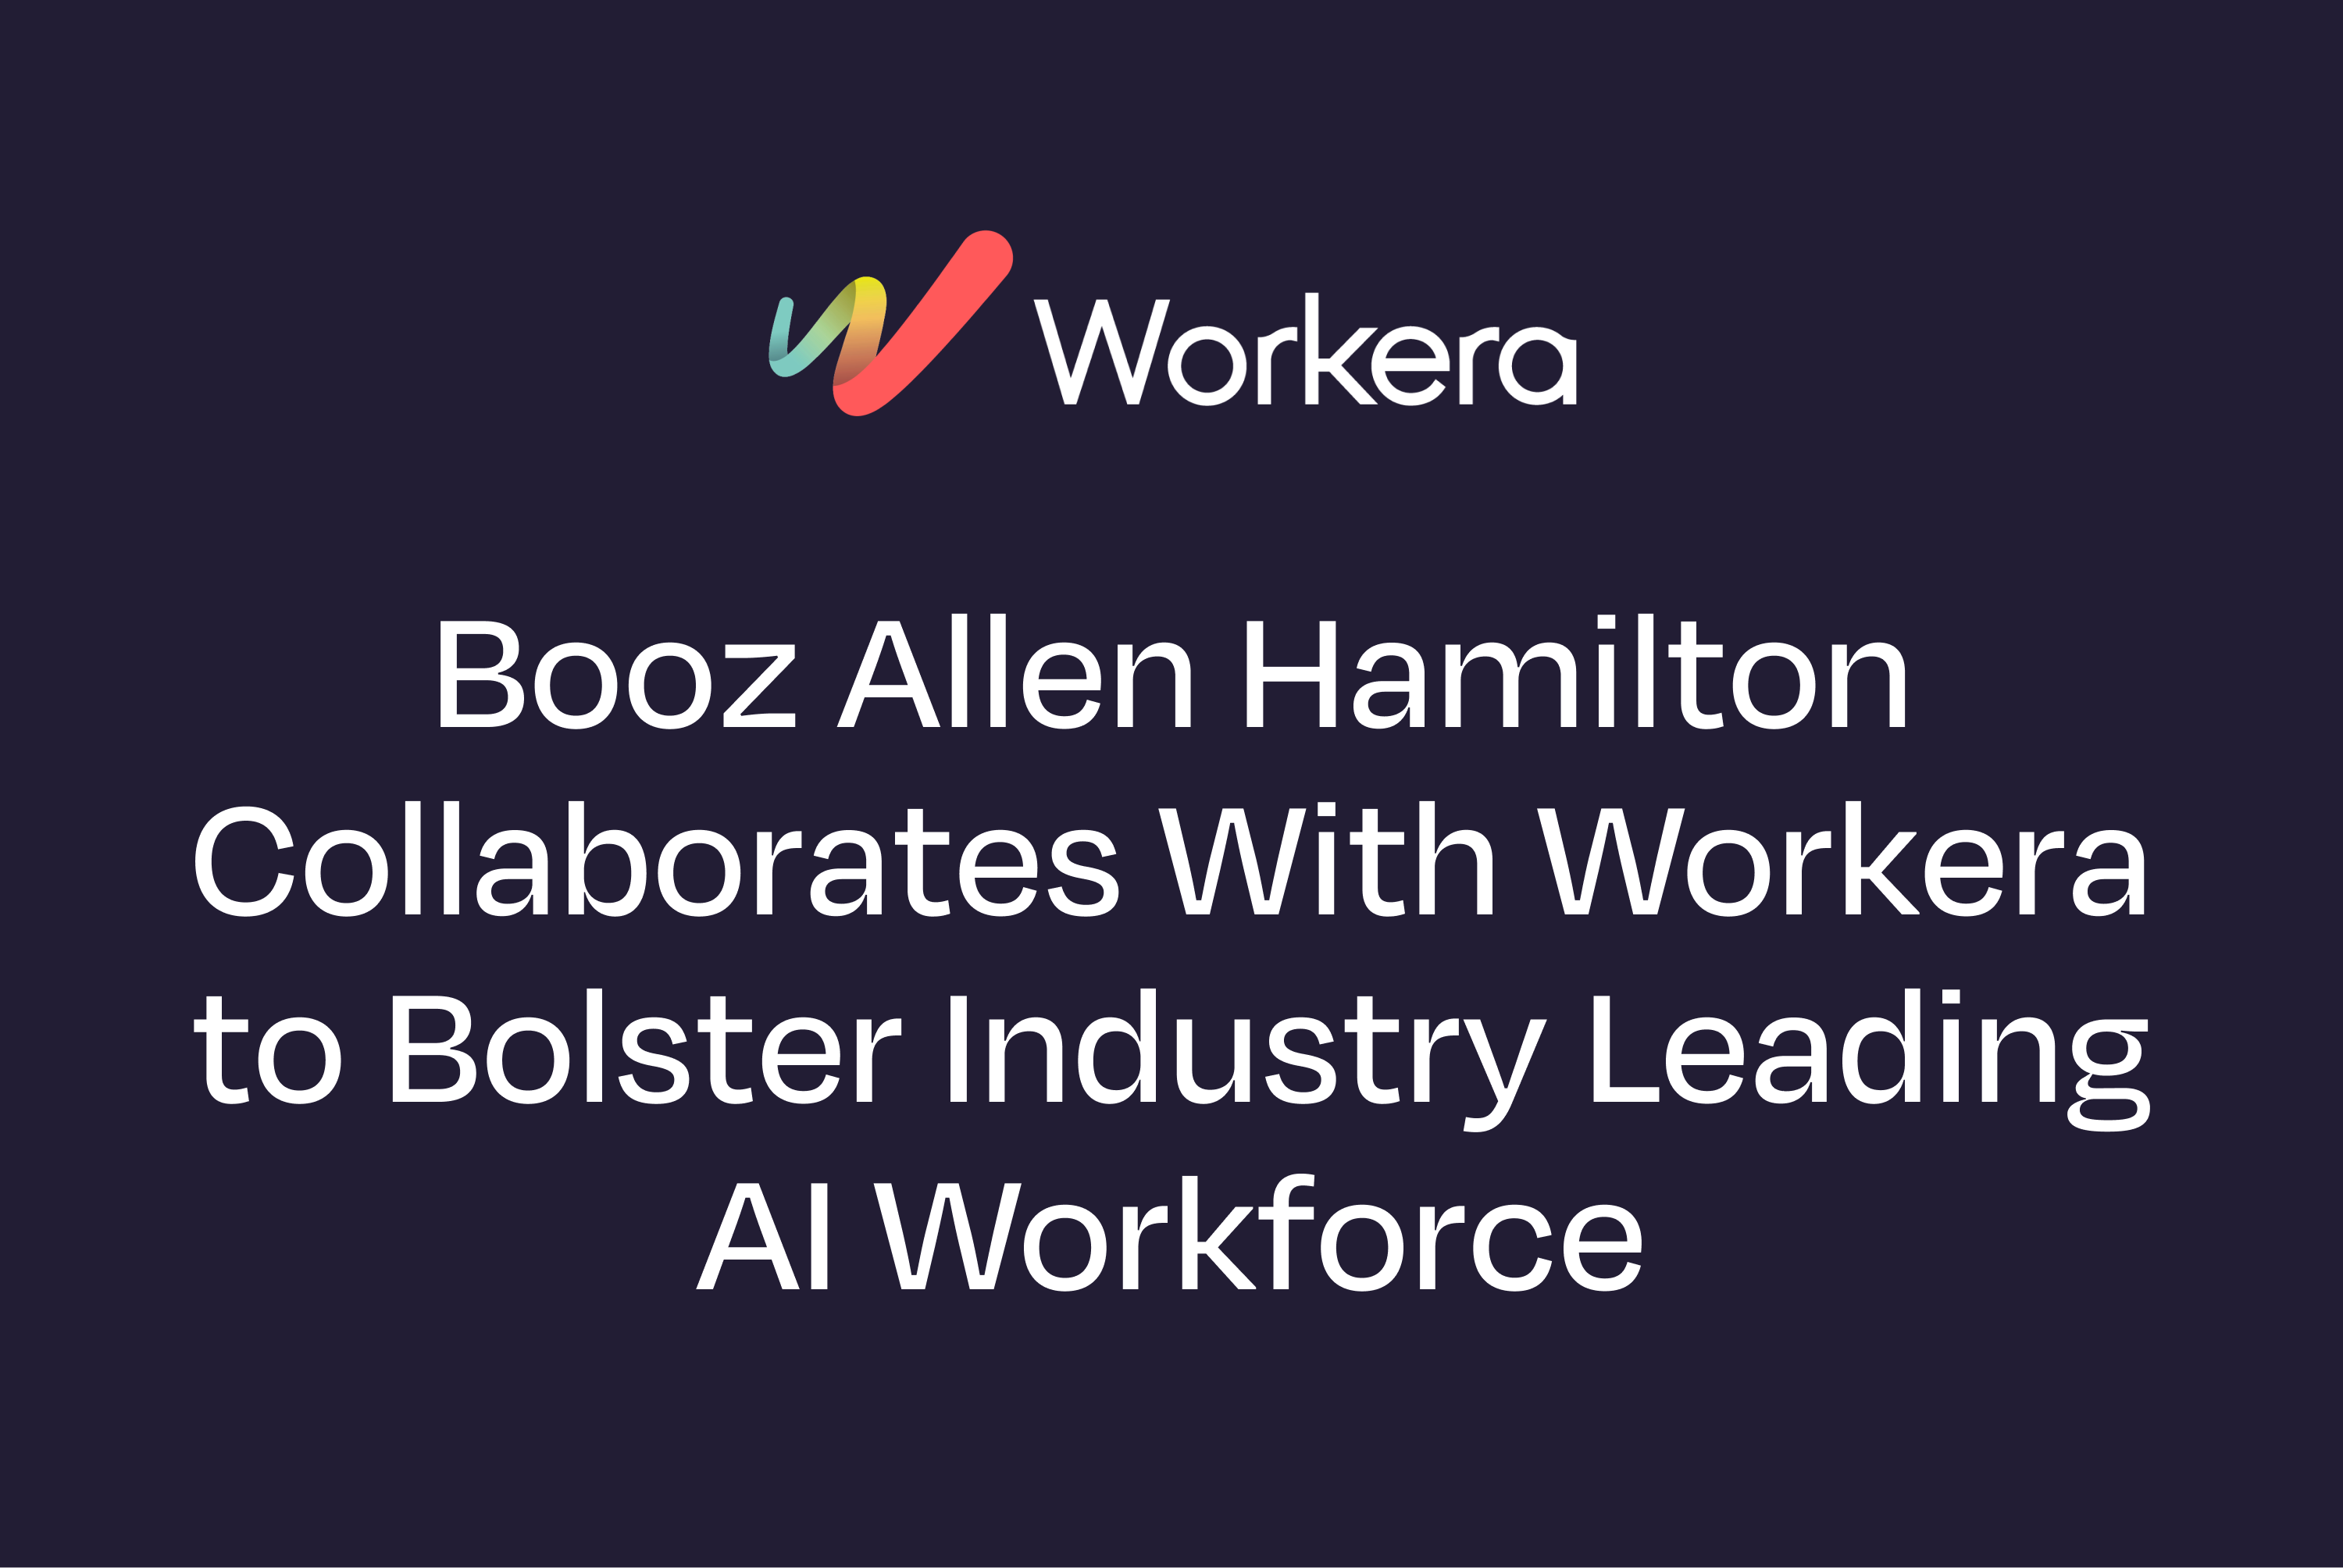 Booz Allen Hamilton Collaborates With Workera to Bolster Industry Leading AI Workforce